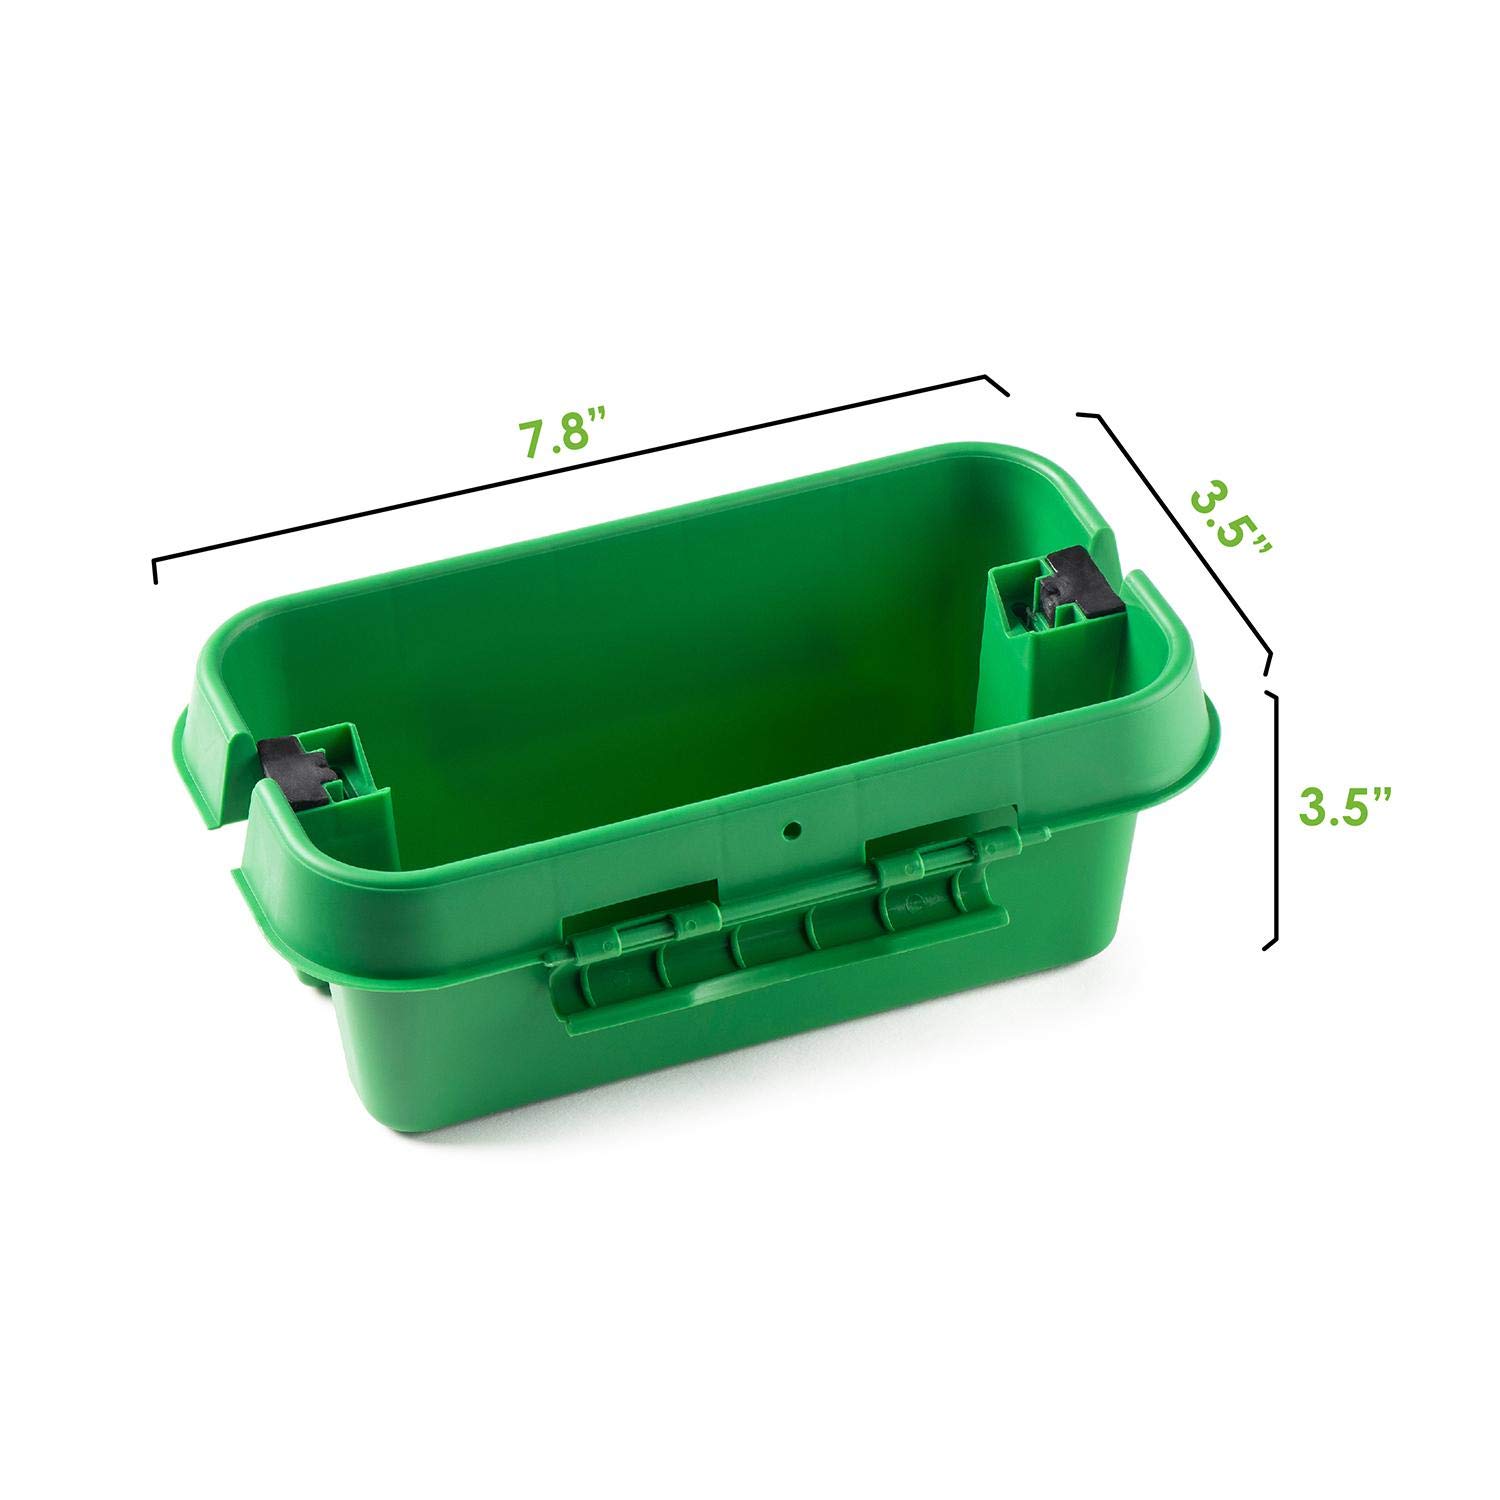 Sockit Box The Original Weatherproof Connection Box Indoor & Outdoor Electrical Cord Enclosure for Timers, Extension Cables, Holiday Lights, Tools, Fountains & More Size Small Green - image 2 of 6